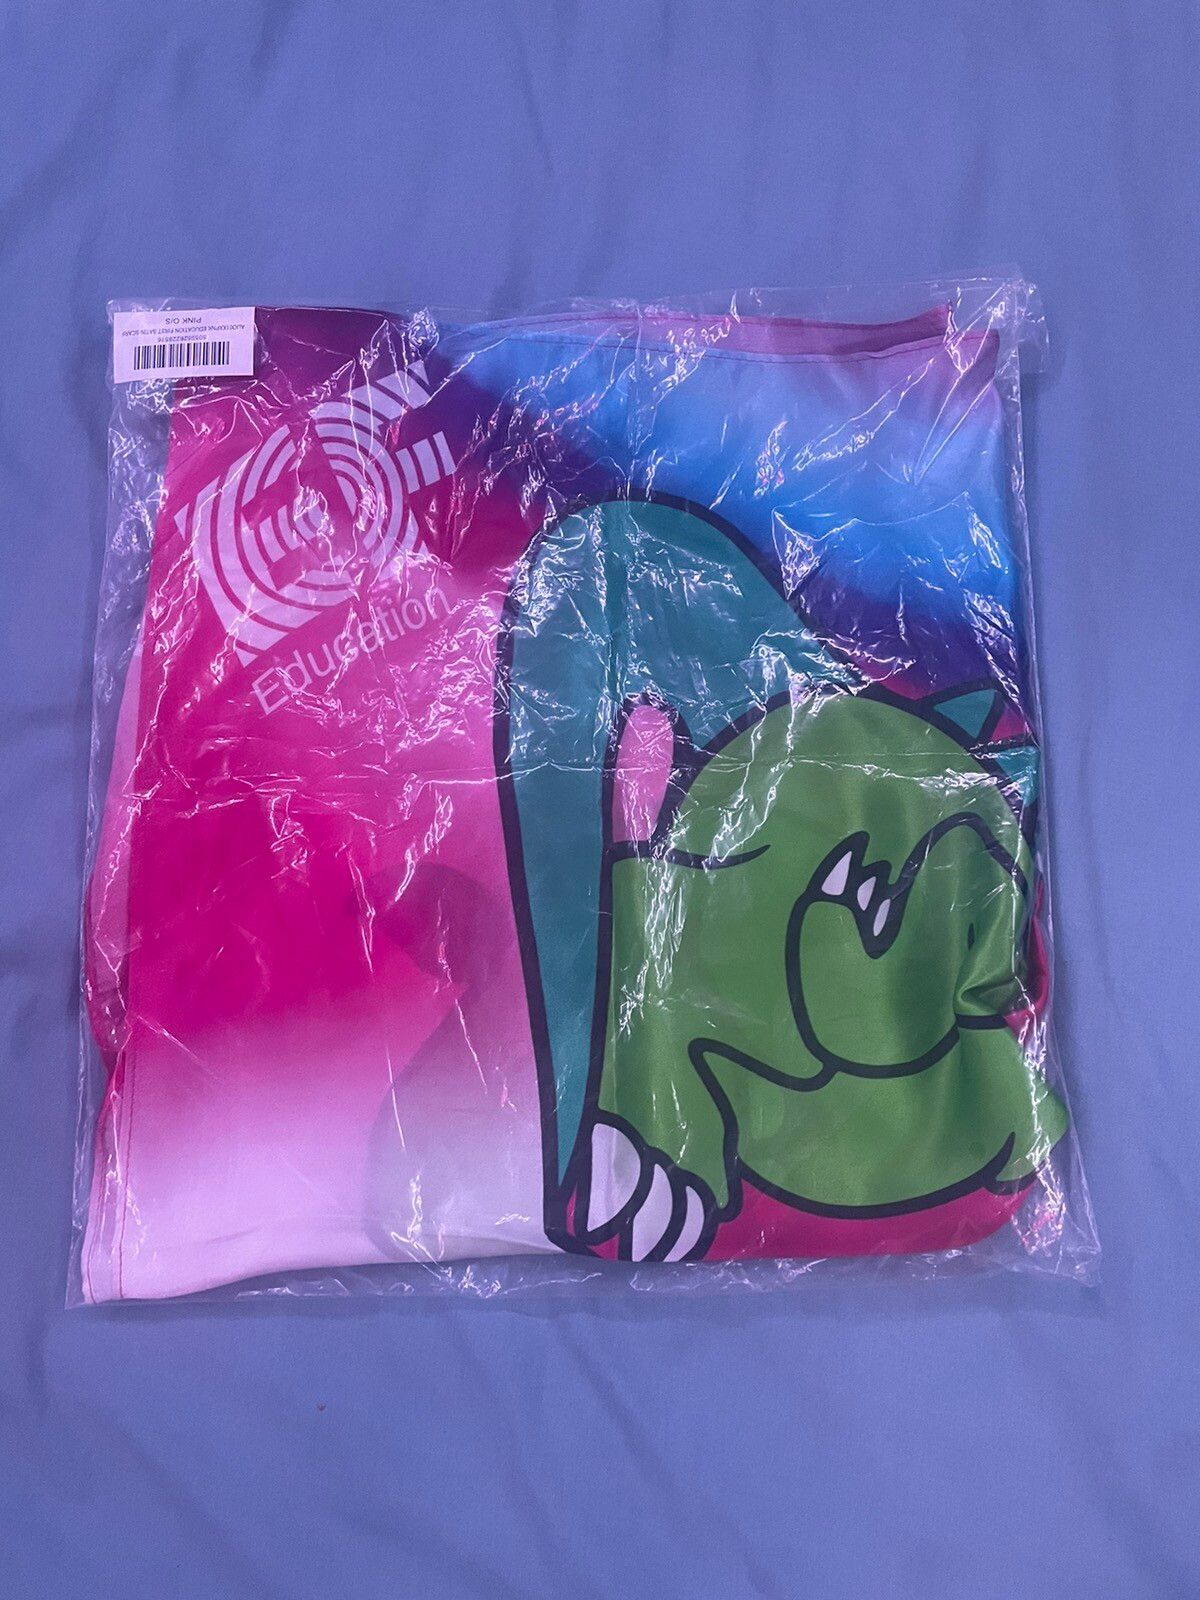 Palace Palace x EF Education First Satin Silk Scarf | Grailed